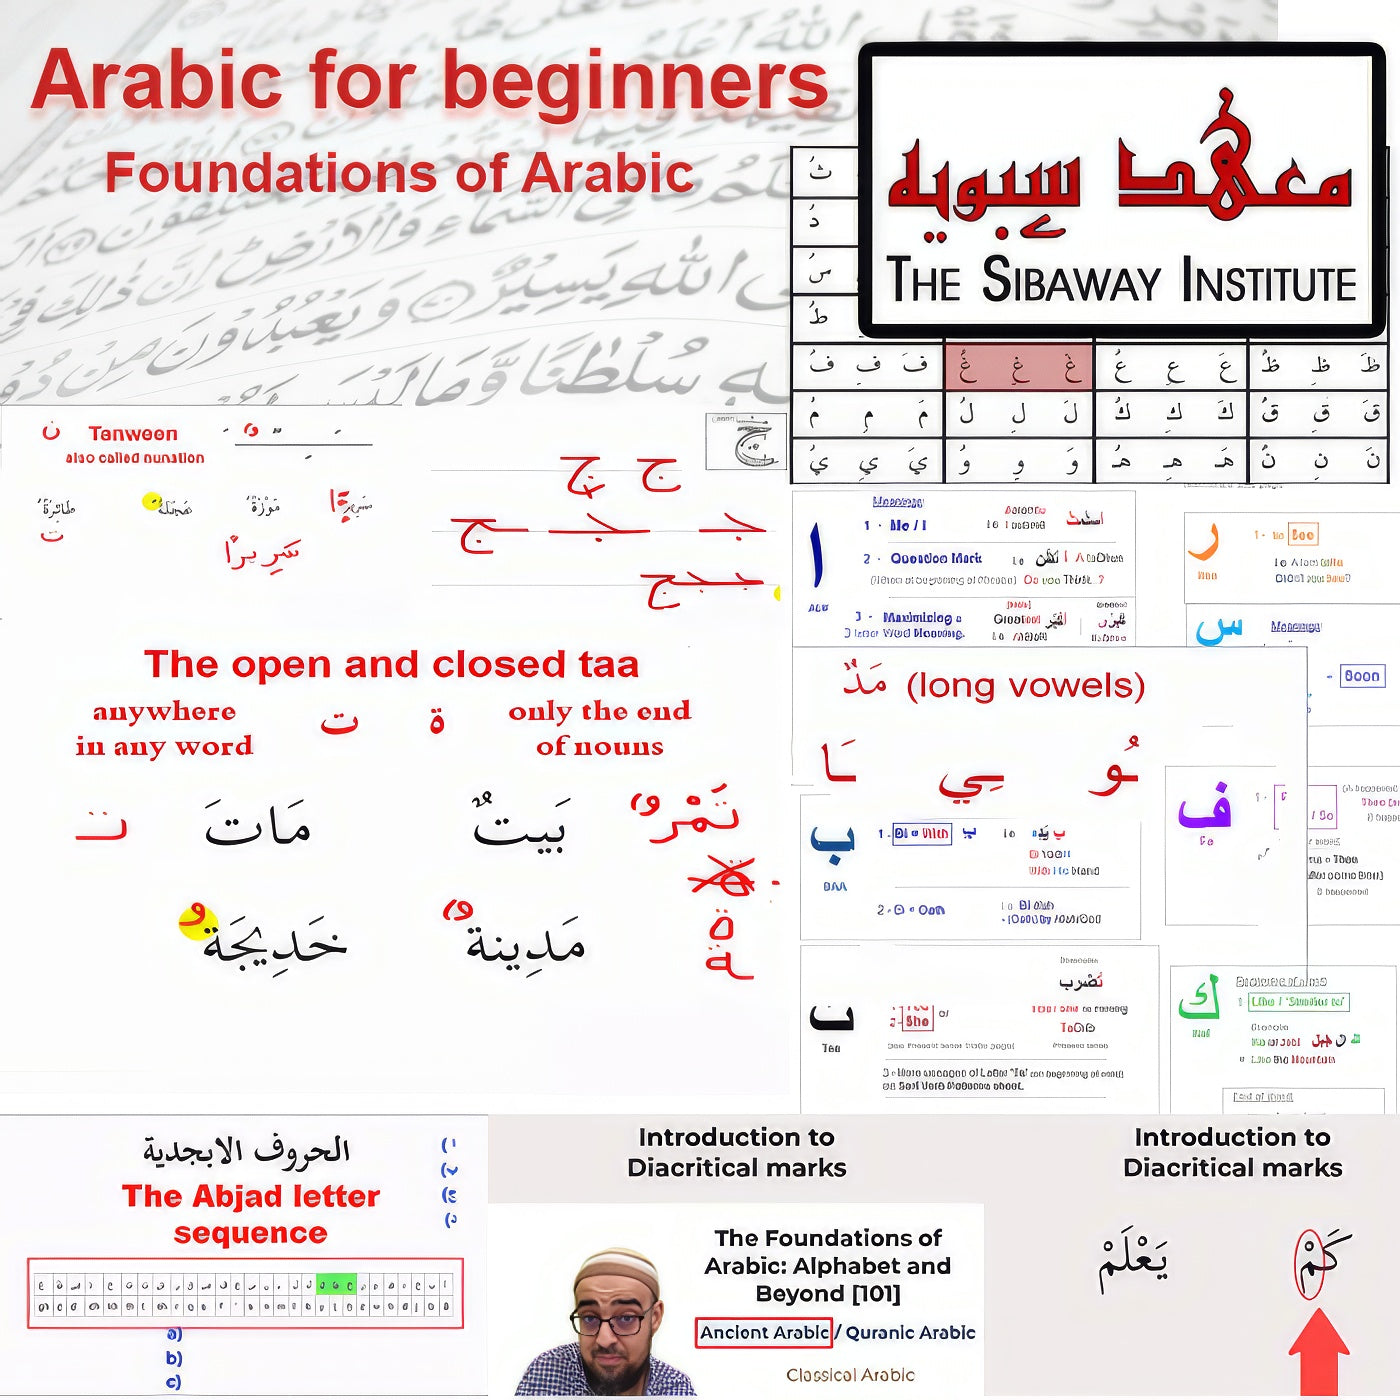 The Foundations of Arabic: Alphabet and Beyond